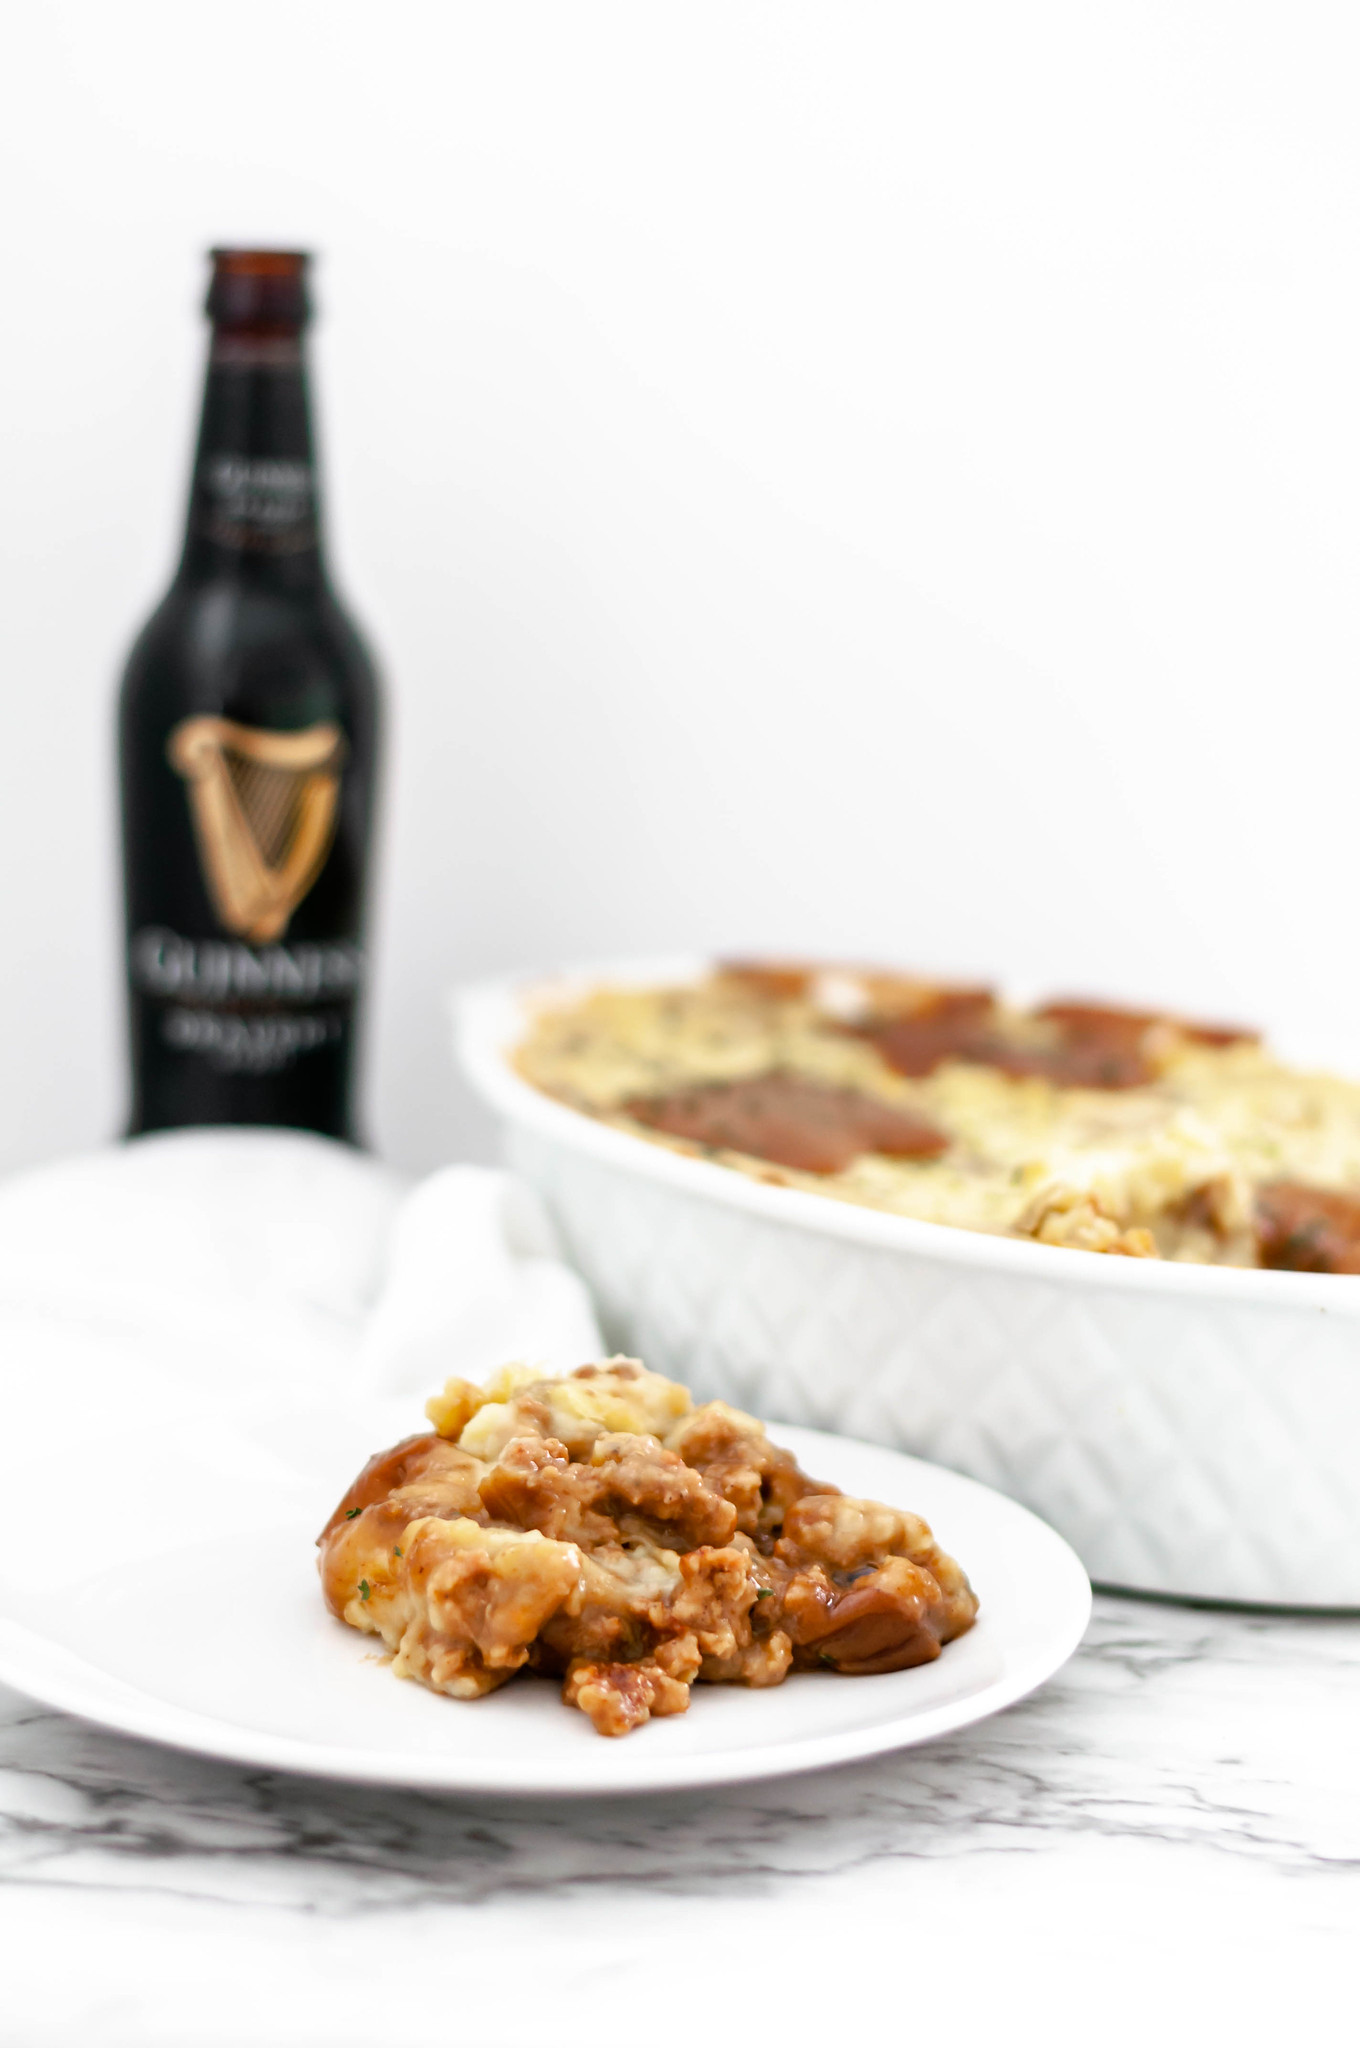 This rich and hearty Bangers and Mash Casserole would be perfect for St. Patrick's Day. All the classic flavors and ingredients of Bangers and Mash combined into a hearty casserole.